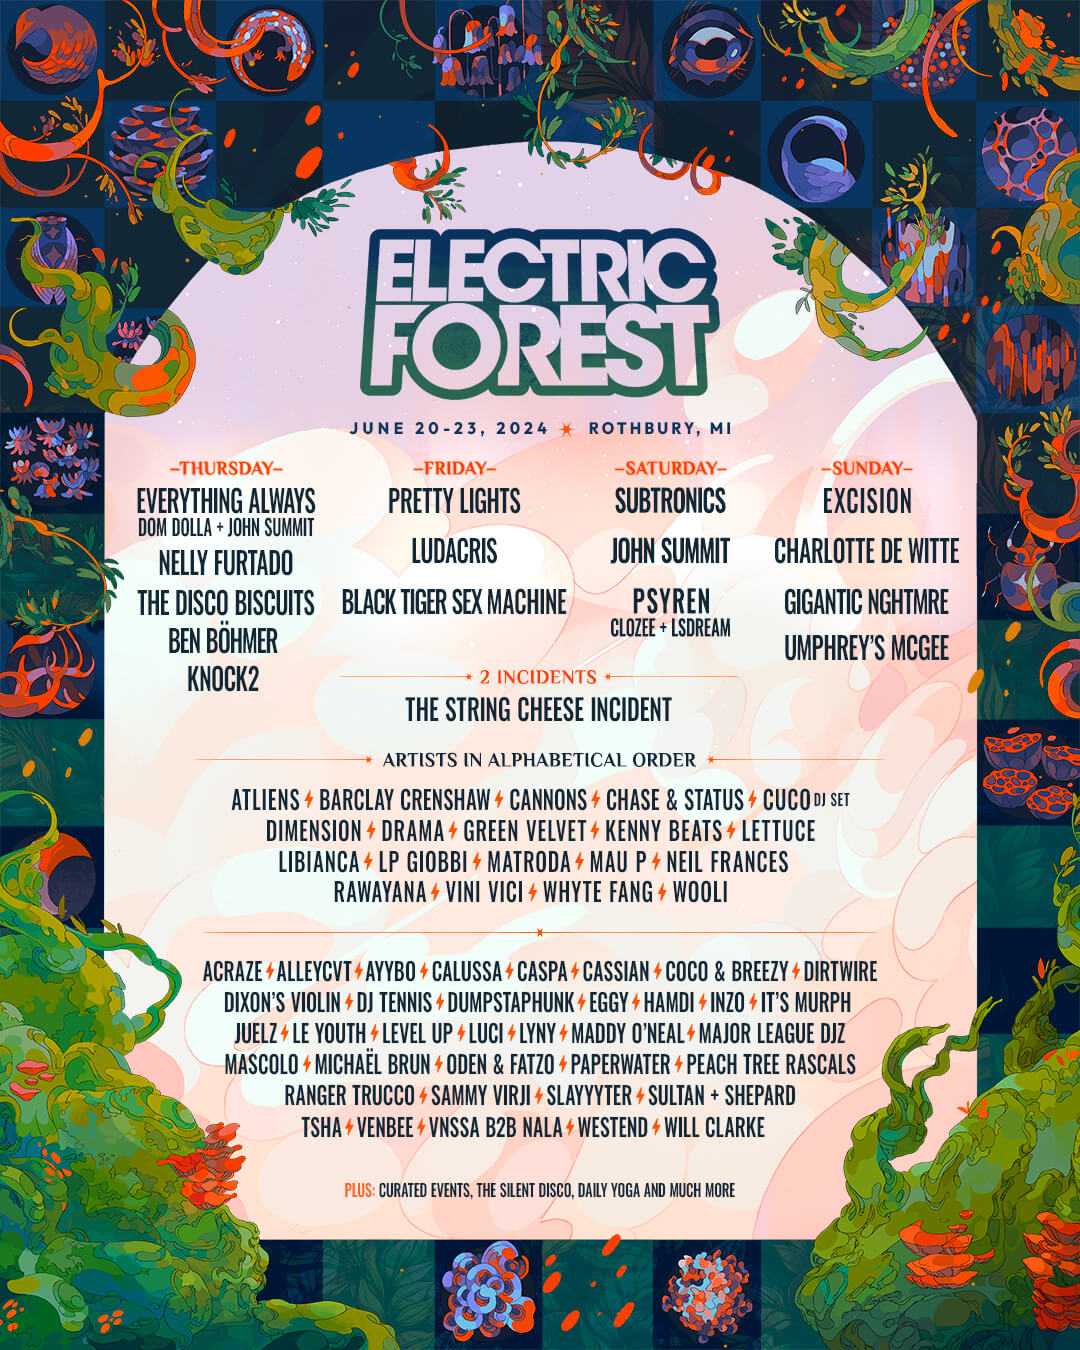 electric-forest-rothbury-2024-06-20